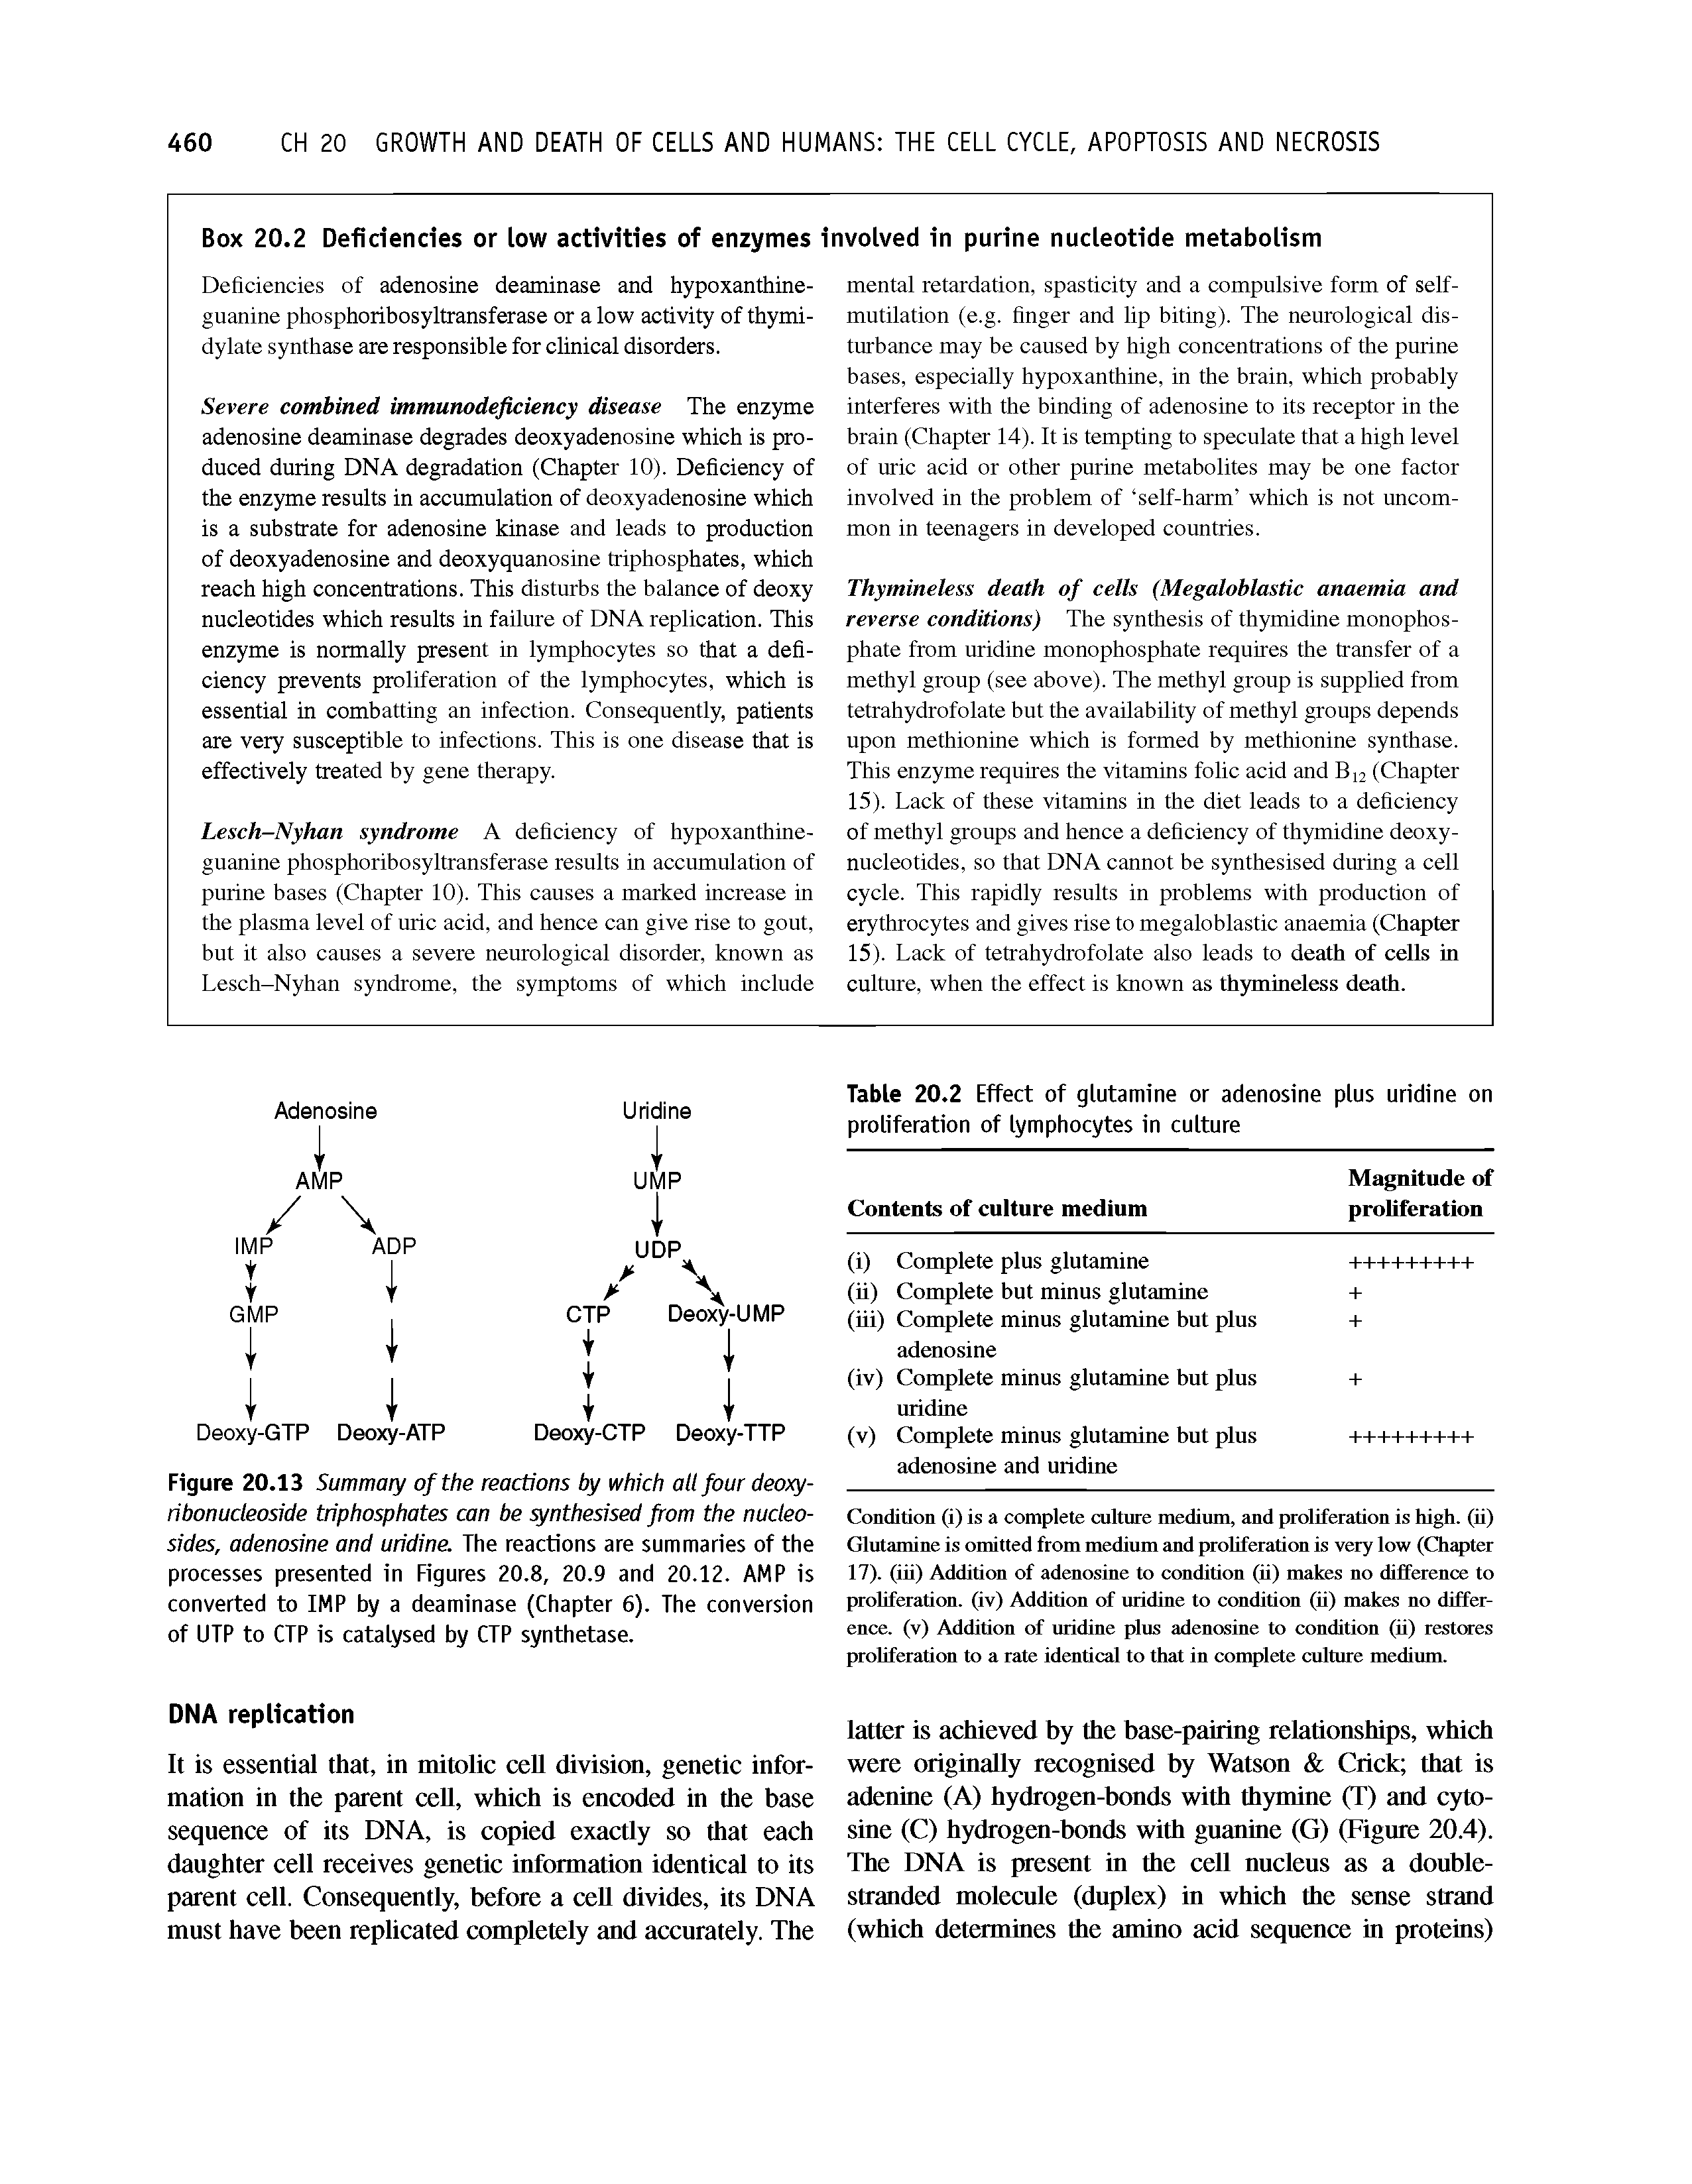 Figure 20.13 Summary of the reactions by which all four deoxy-ribonucleoside triphosphates can be synthesised from the nucleosides, adenosine and uridine. The reactions are summaries of the processes presented in Figures 20.8, 20.9 and 20.12. AMP is converted to IMP by a deaminase (Chapter 6). The conversion of UTP to CTP is catalysed by CTP synthetase.